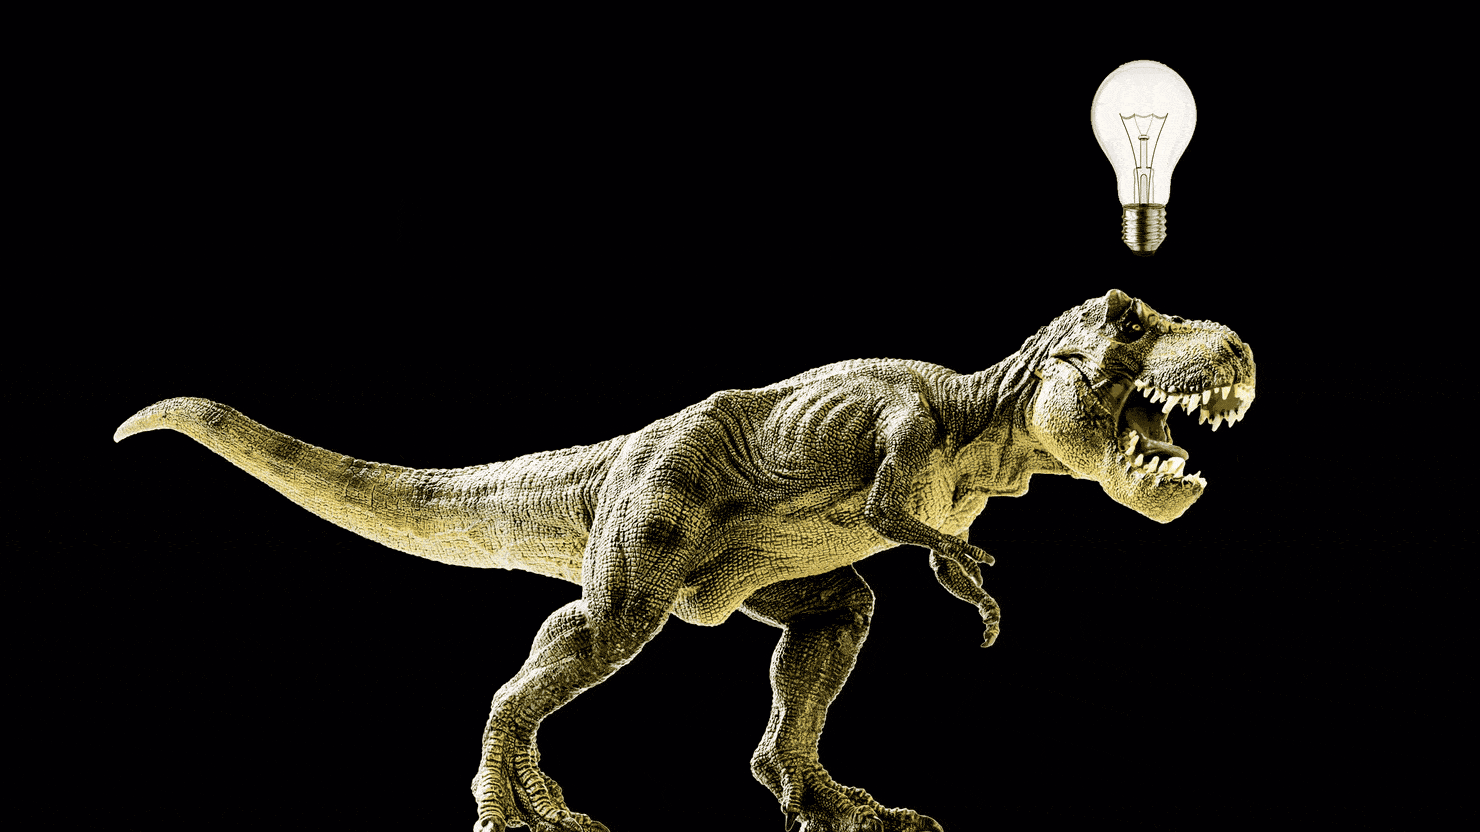 new research shows that trex was as smart as a chimp